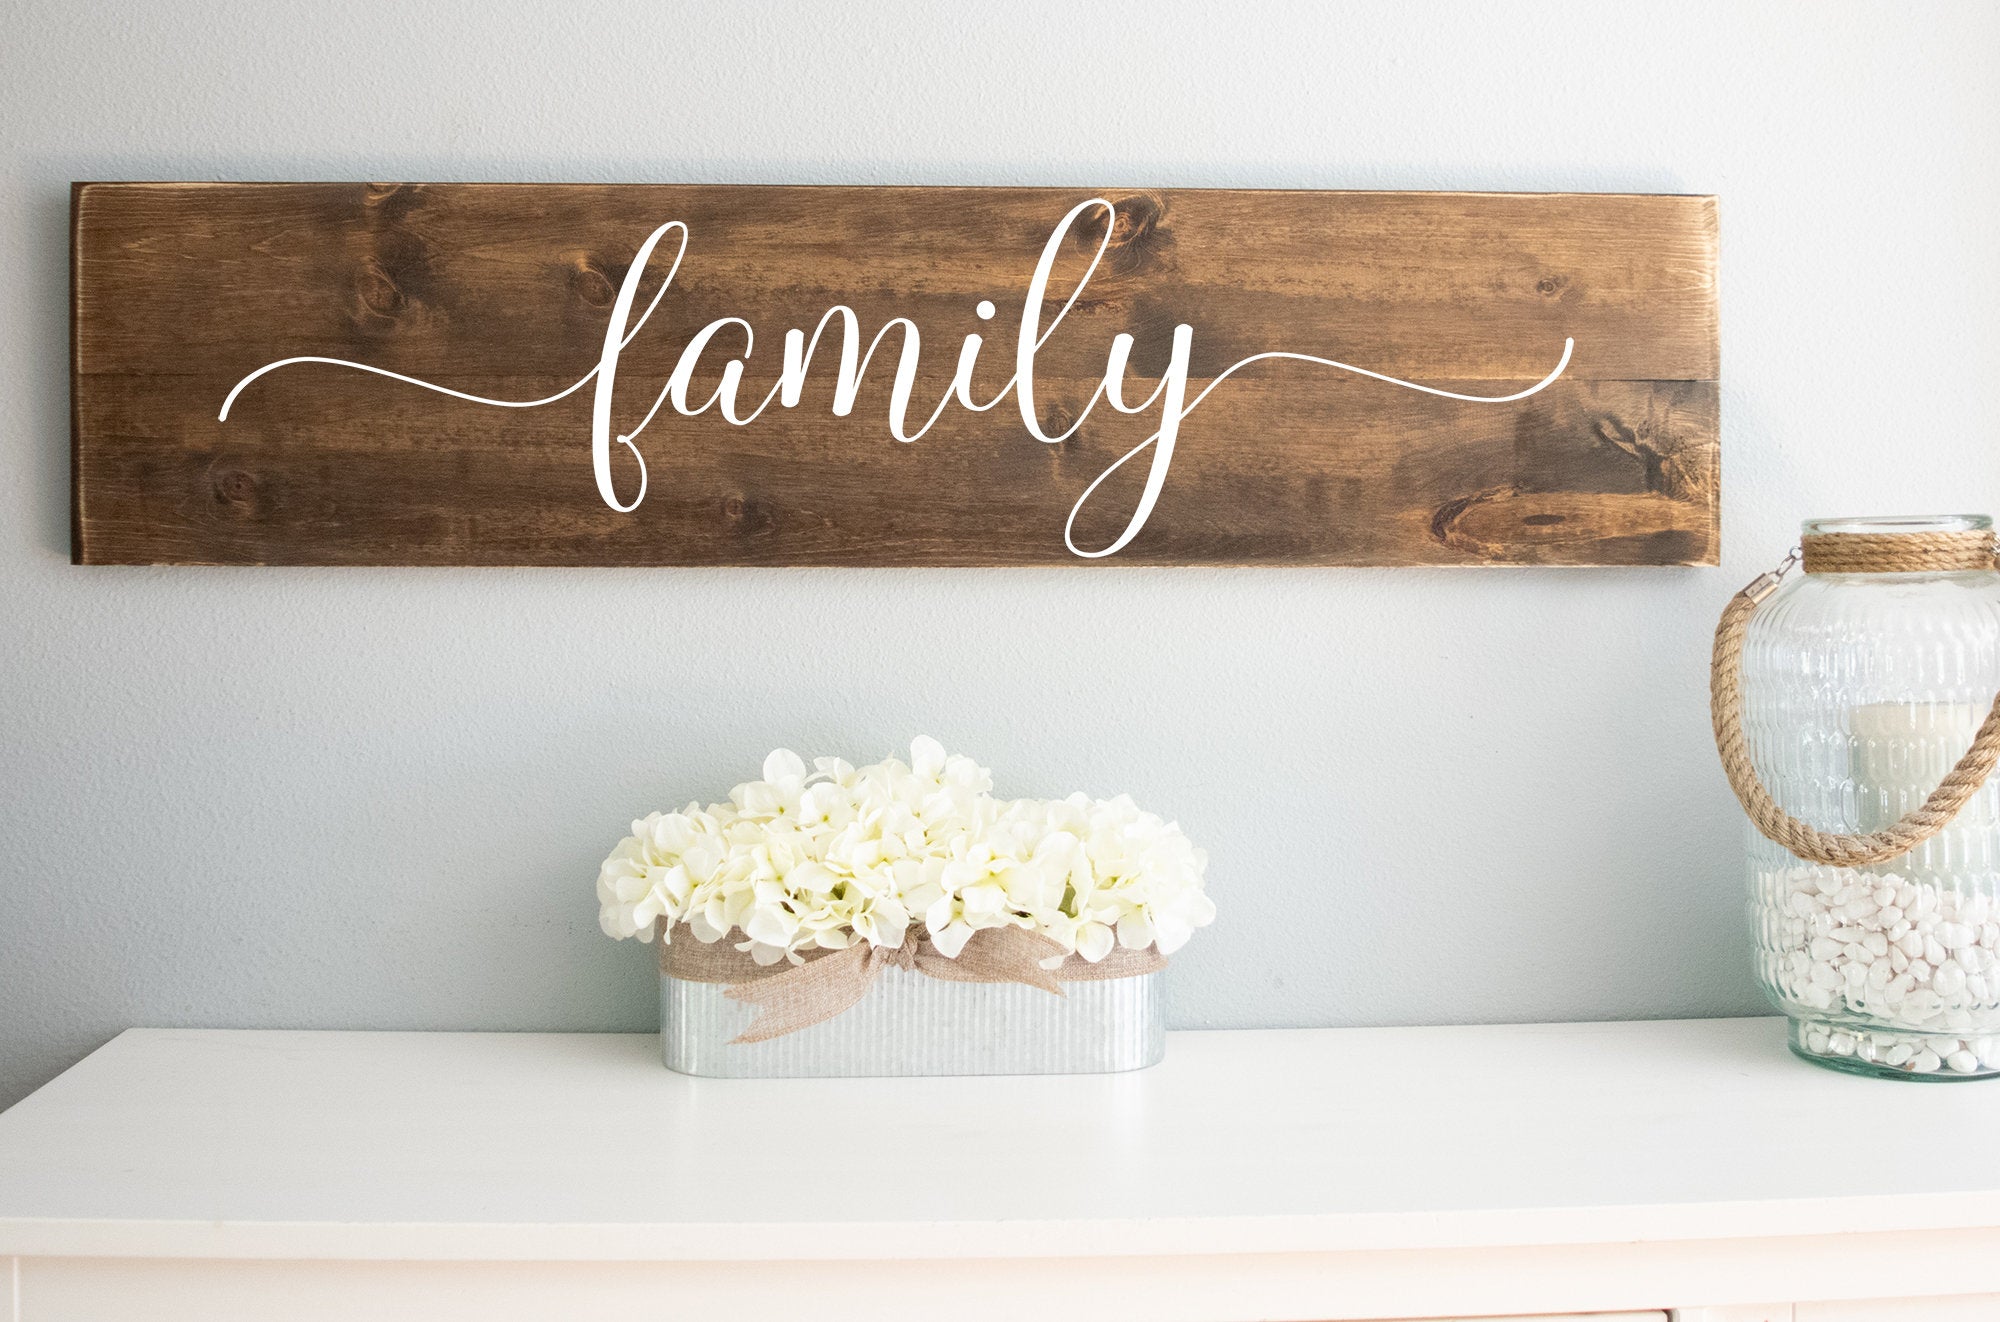 Family Wood Sign,  Farmhouse Wooden Sayings Wall Décor, Farmhouse Wall Hangings, Wood Wall Art, Large Wood Sign, Large Rustic Wall Decor